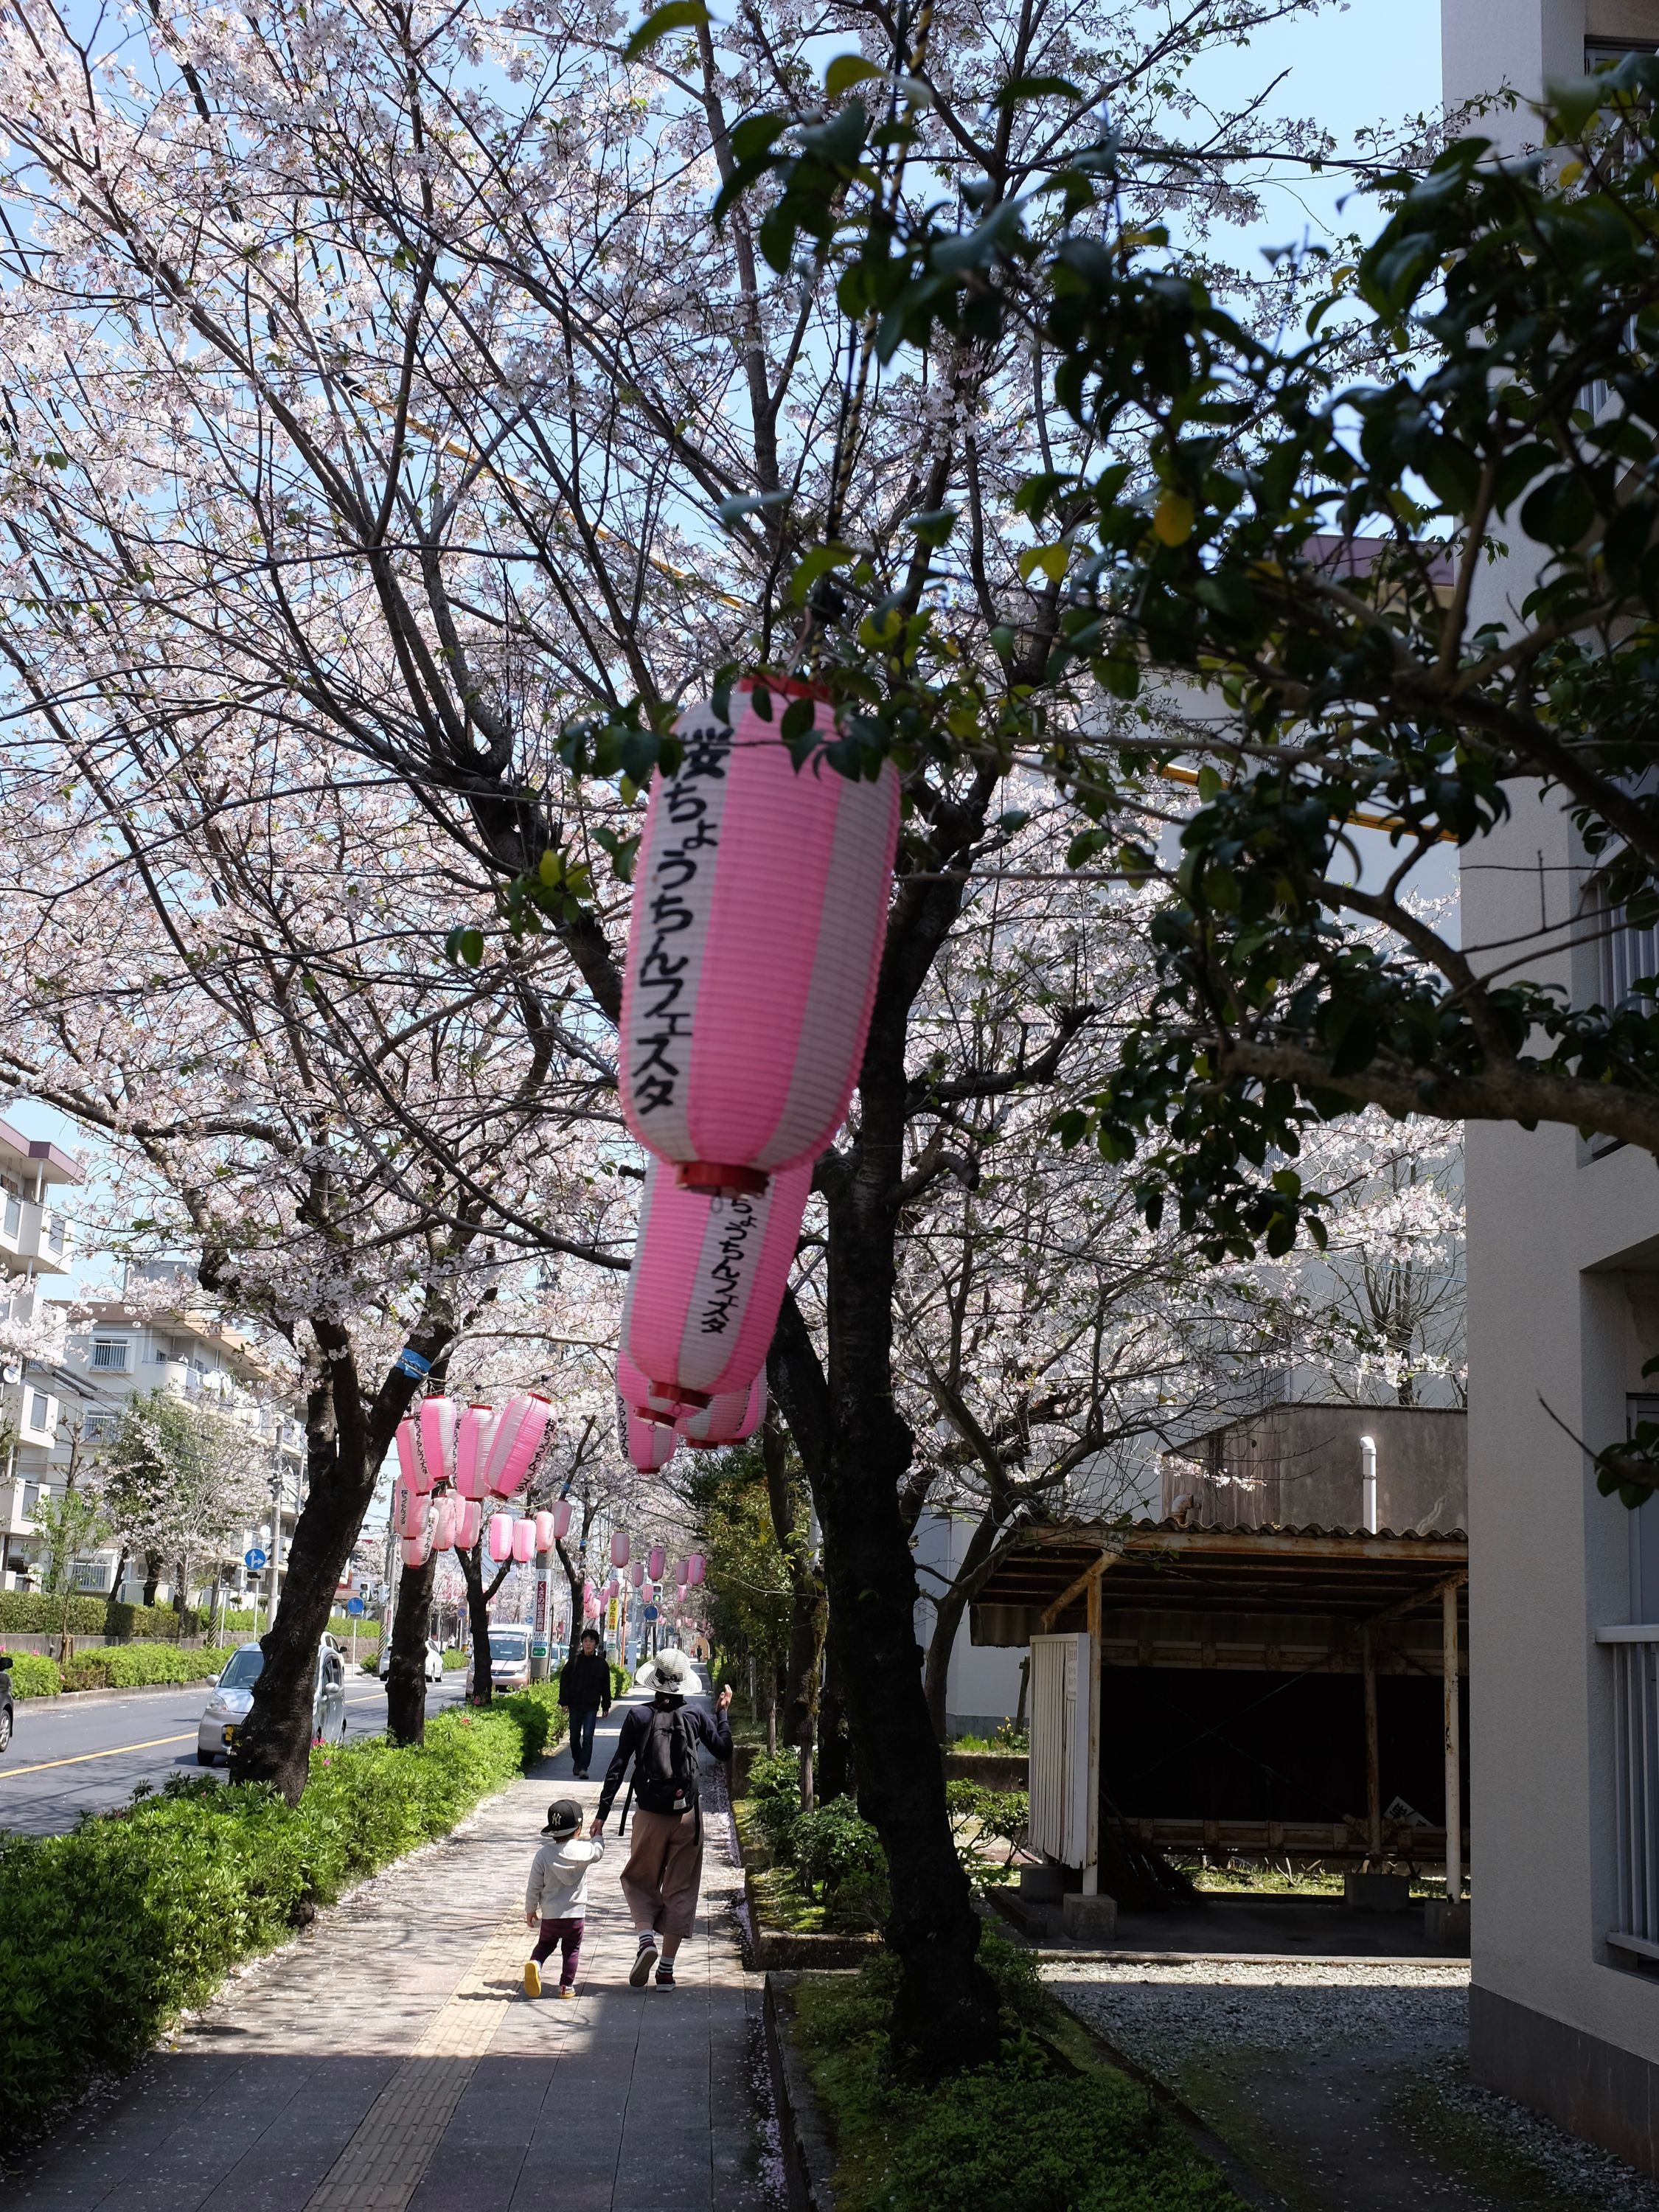 A woman holds the hand of a child on a street lined with blooming cherry trees.